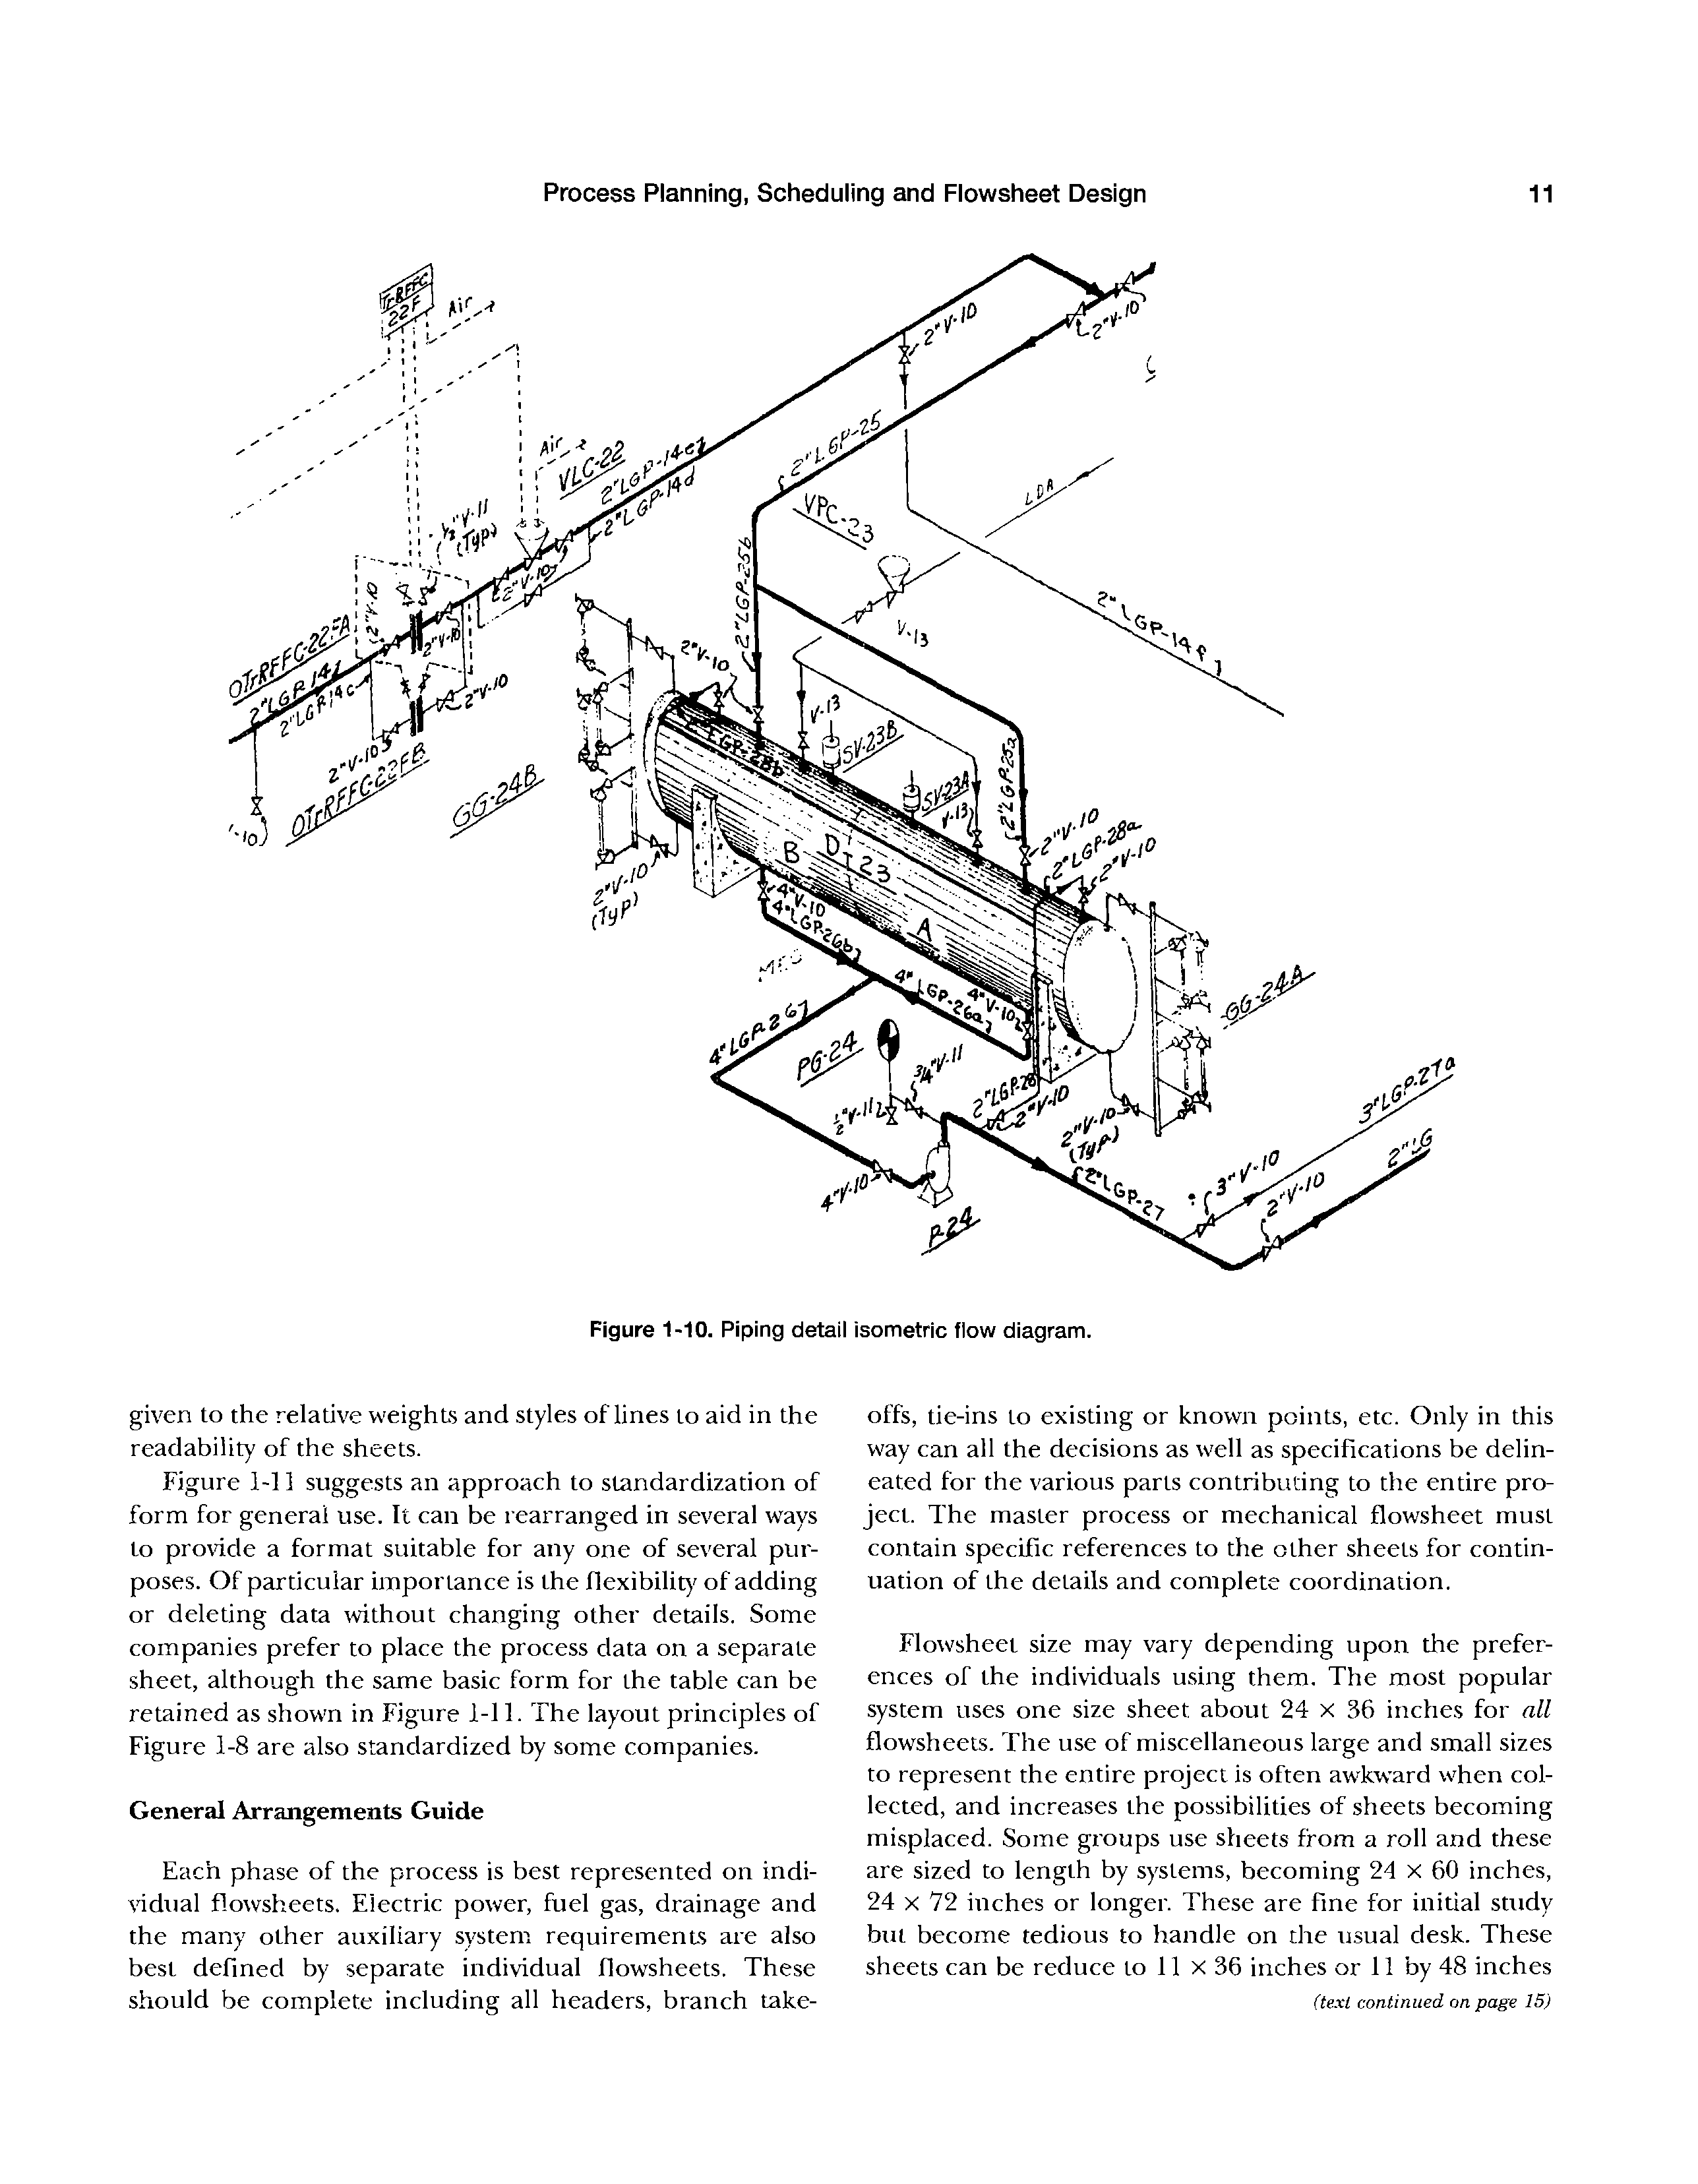 Figure 1-10. Piping detail isometric flow diagram.